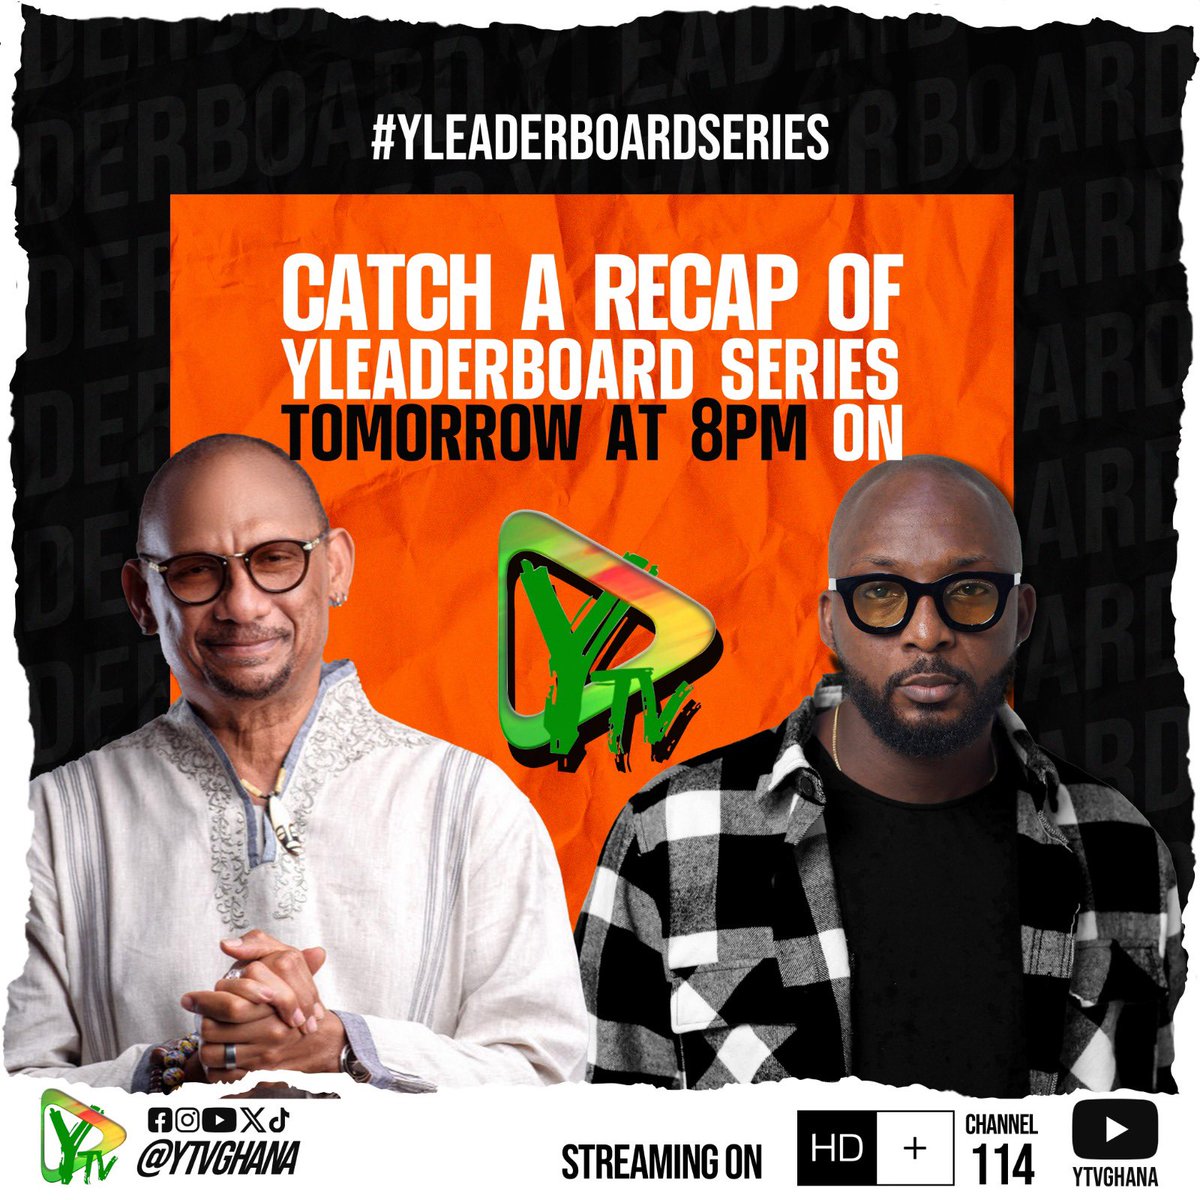 In case you missed it last Wednesday, here’s chance to catch the conversation again on @ytvghana tomorrow evening at 8pm. @RevErskineGH had an interesting conversation with #BenBrako. Don’t miss it! #YLeaderBoardSeries